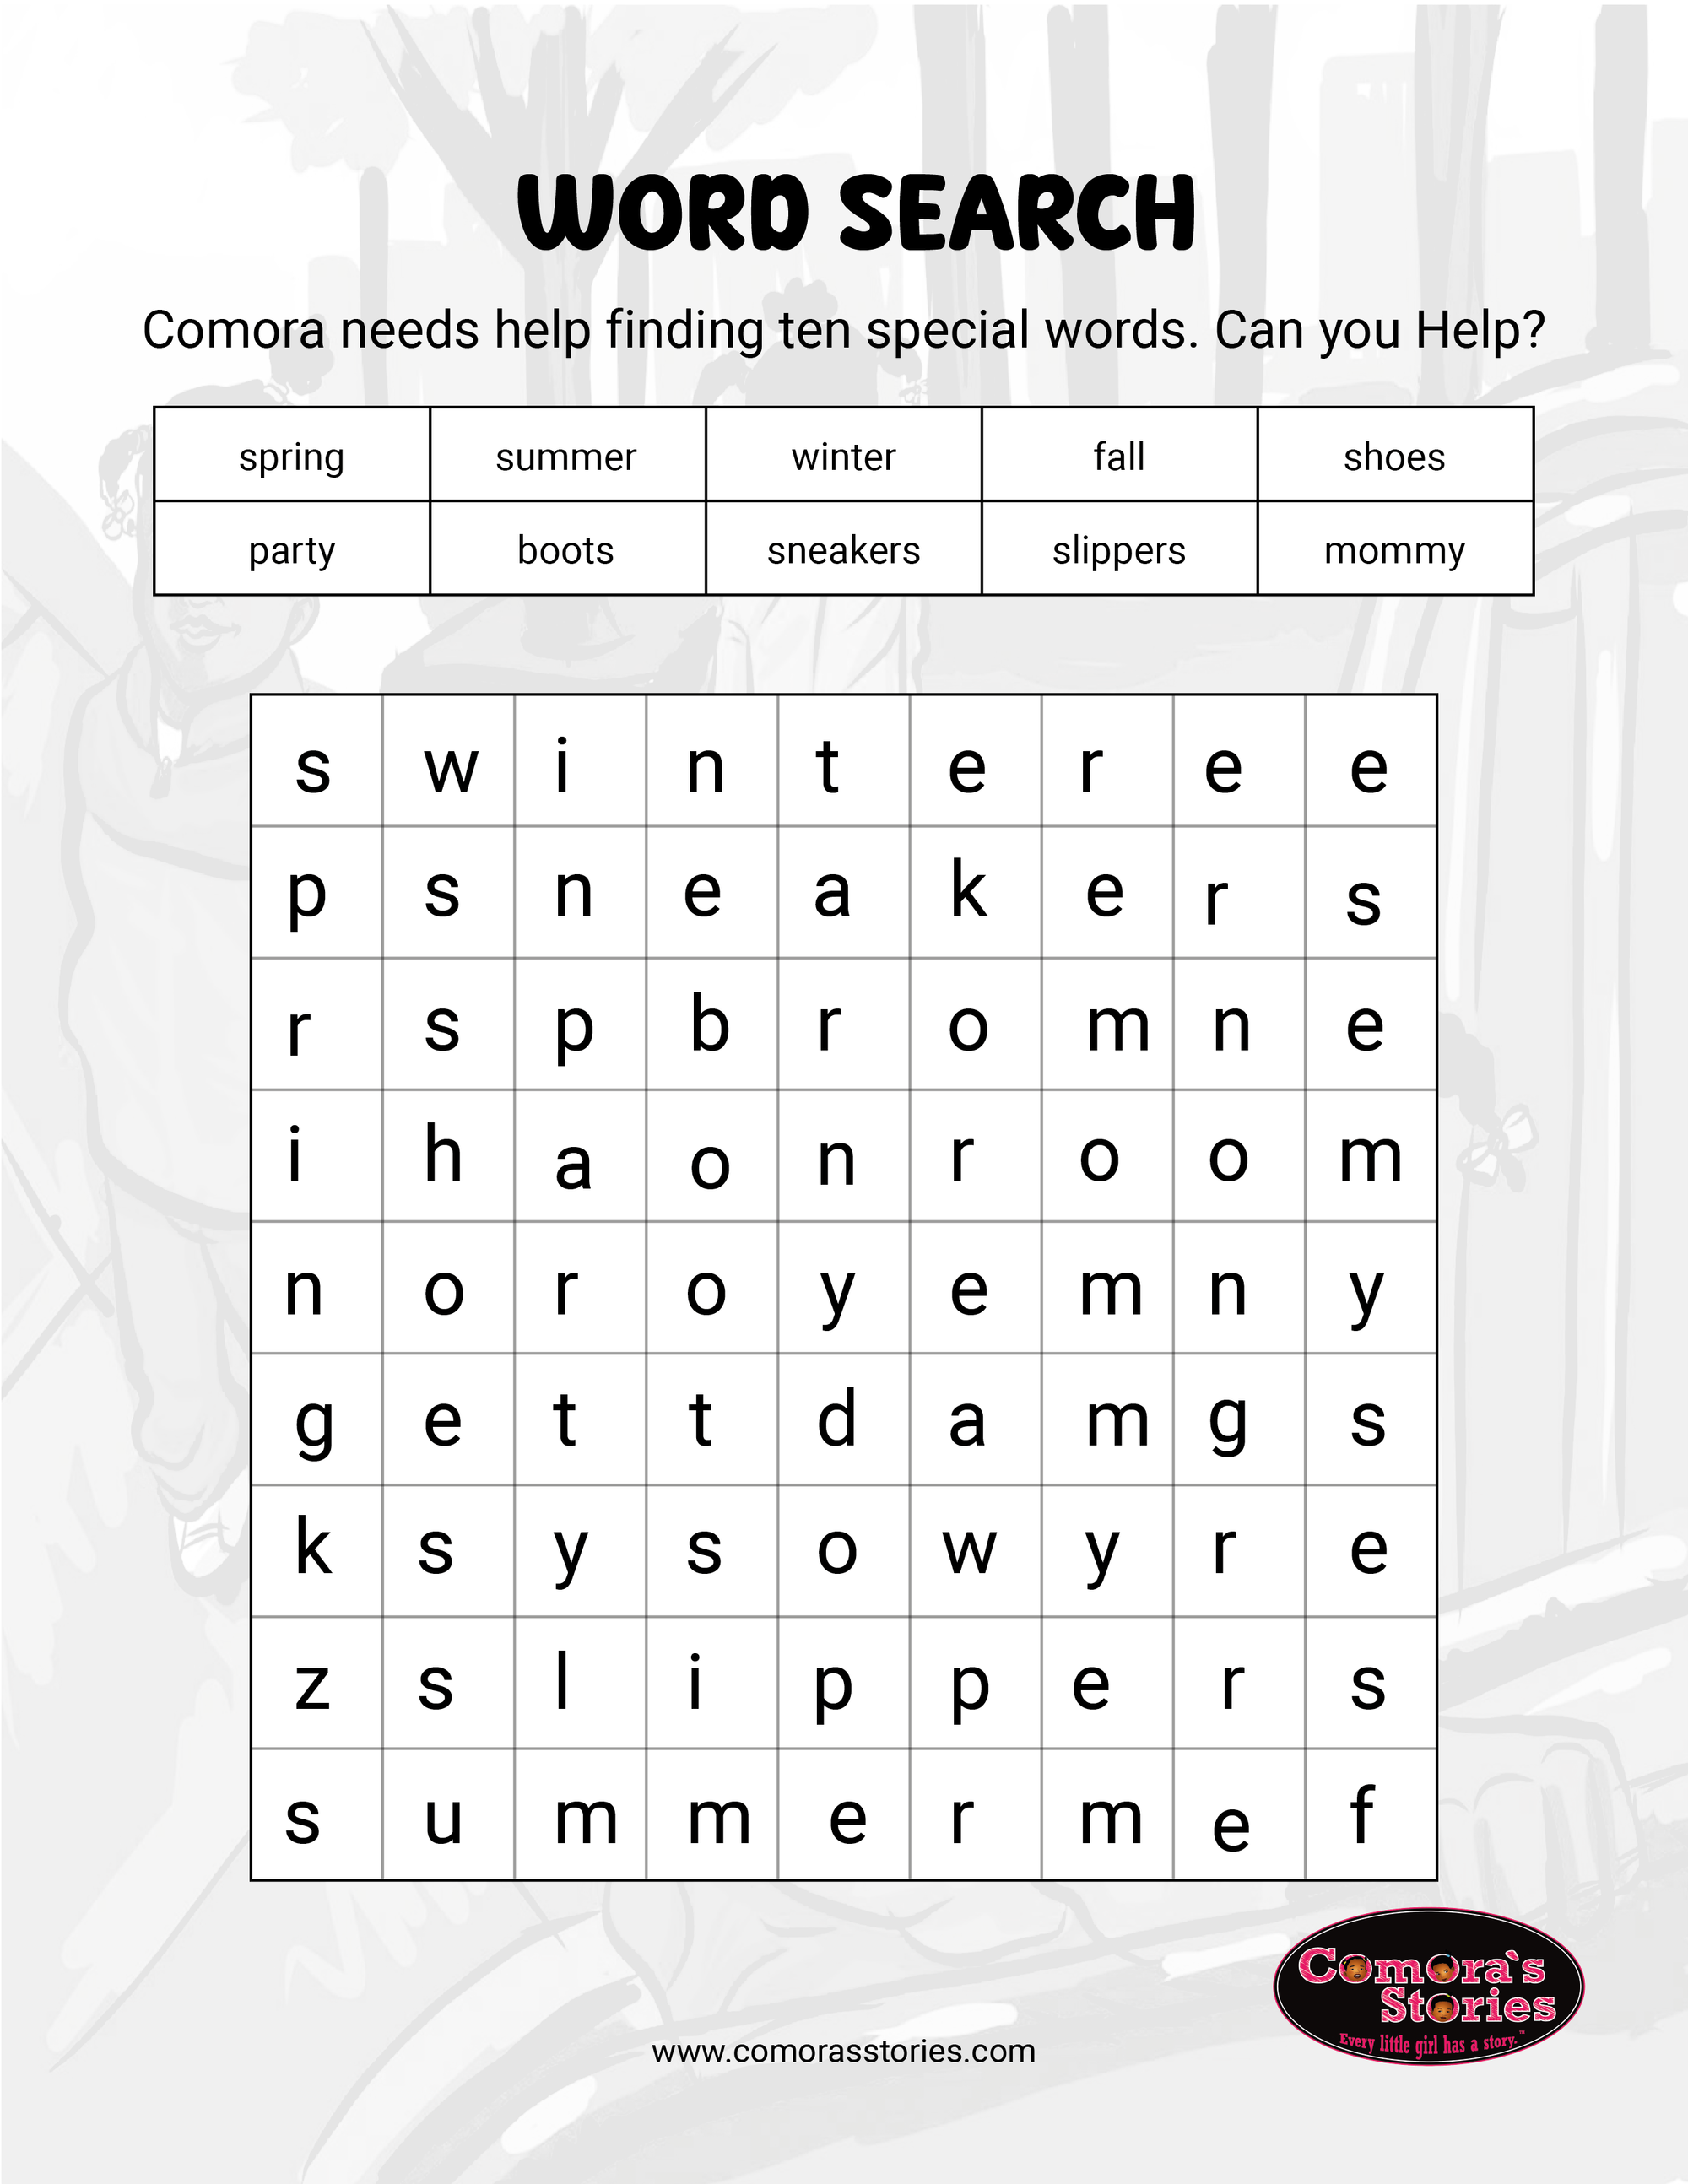 NEW SHOES WORD SEARCH